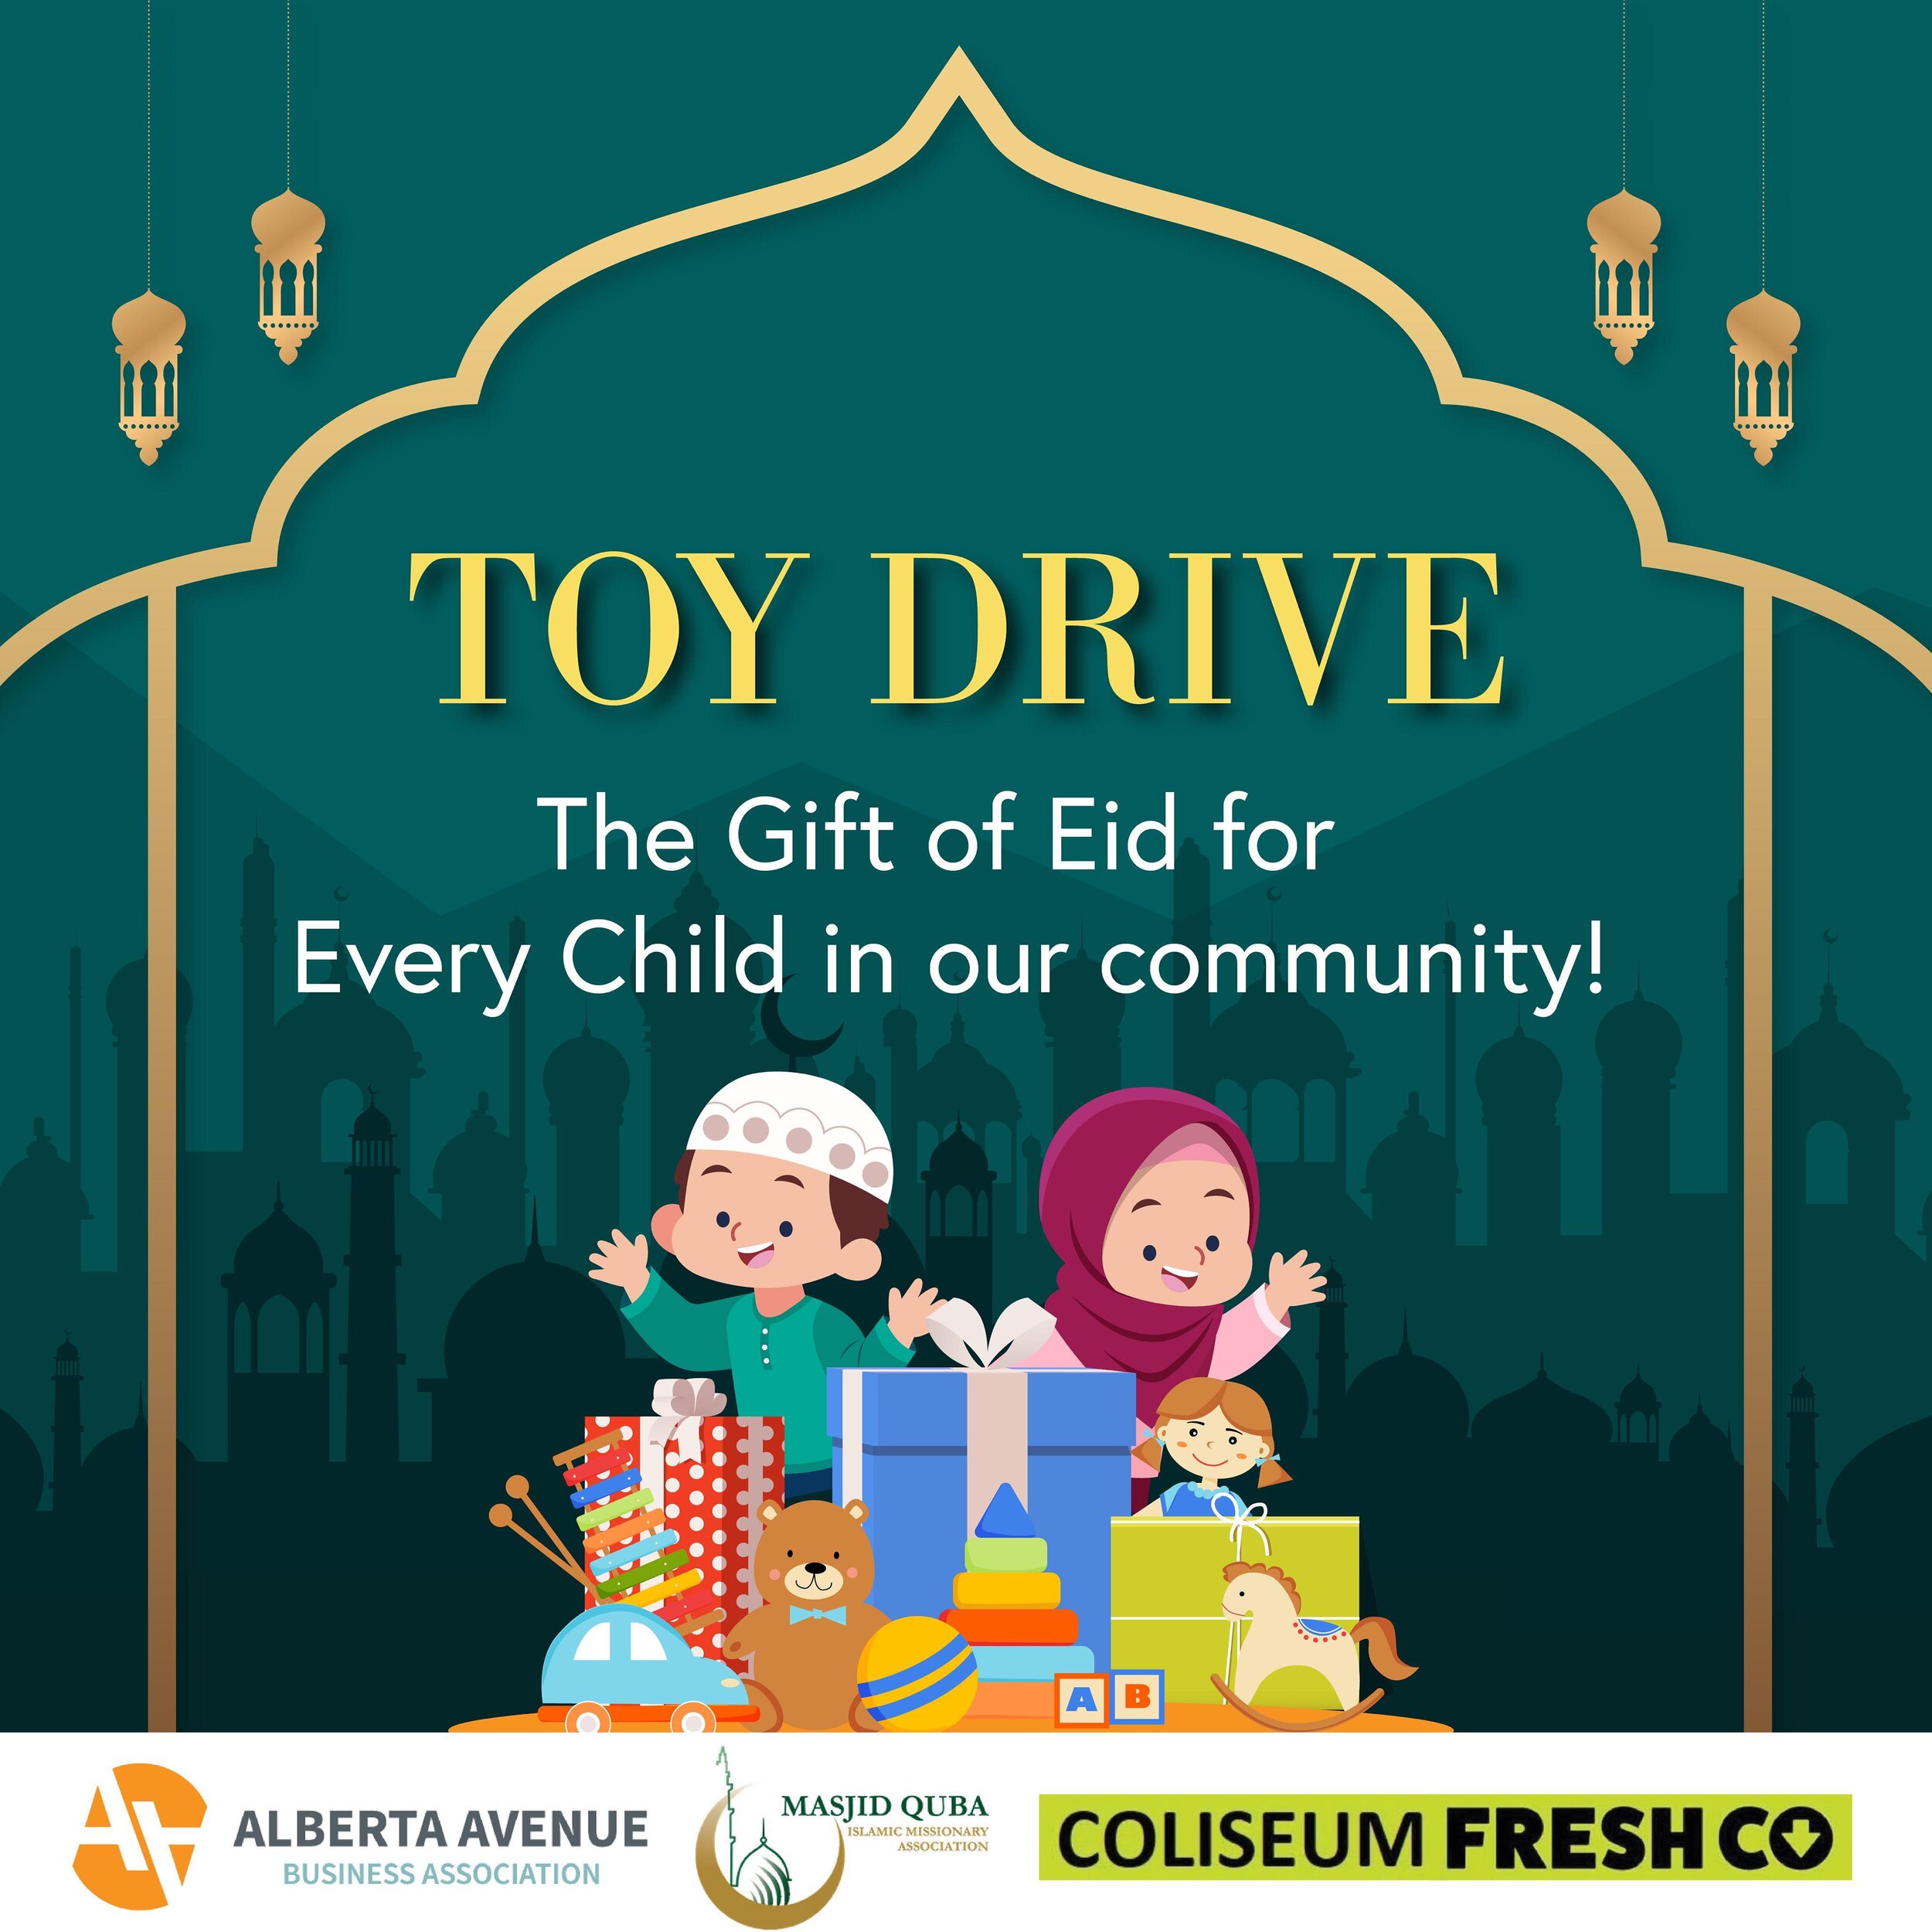 🌙✨ With the spirit of generosity and community at heart, this Ramadan marks a special collaboration between the Alberta Avenue Business Association, @masjid_quba and Coliseum Freshco Grocery. 🧸

Our aim is to spread the joy of Eid to children in ou